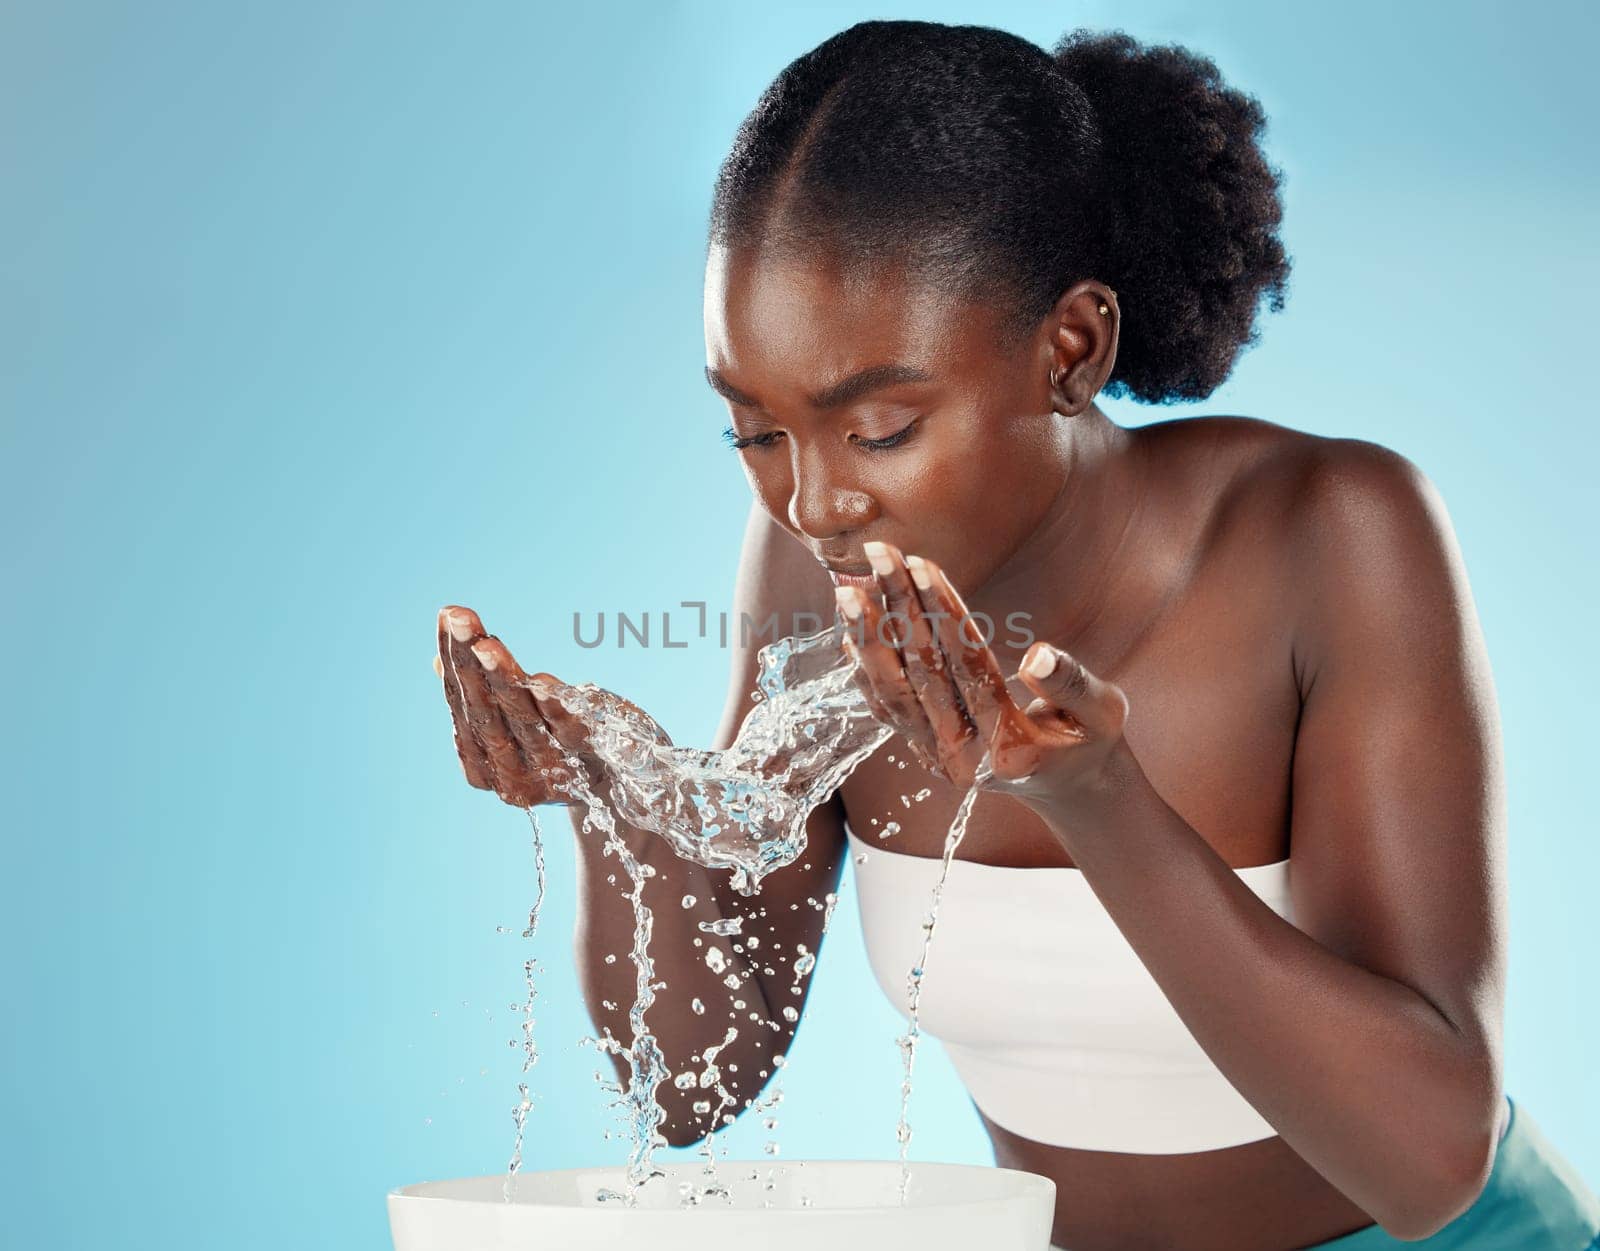 Water, wash and woman splashing her face for cleansing hygiene and skincare on a blue studio background. Skin care, body care and beauty female washing her for facial health and wellness.